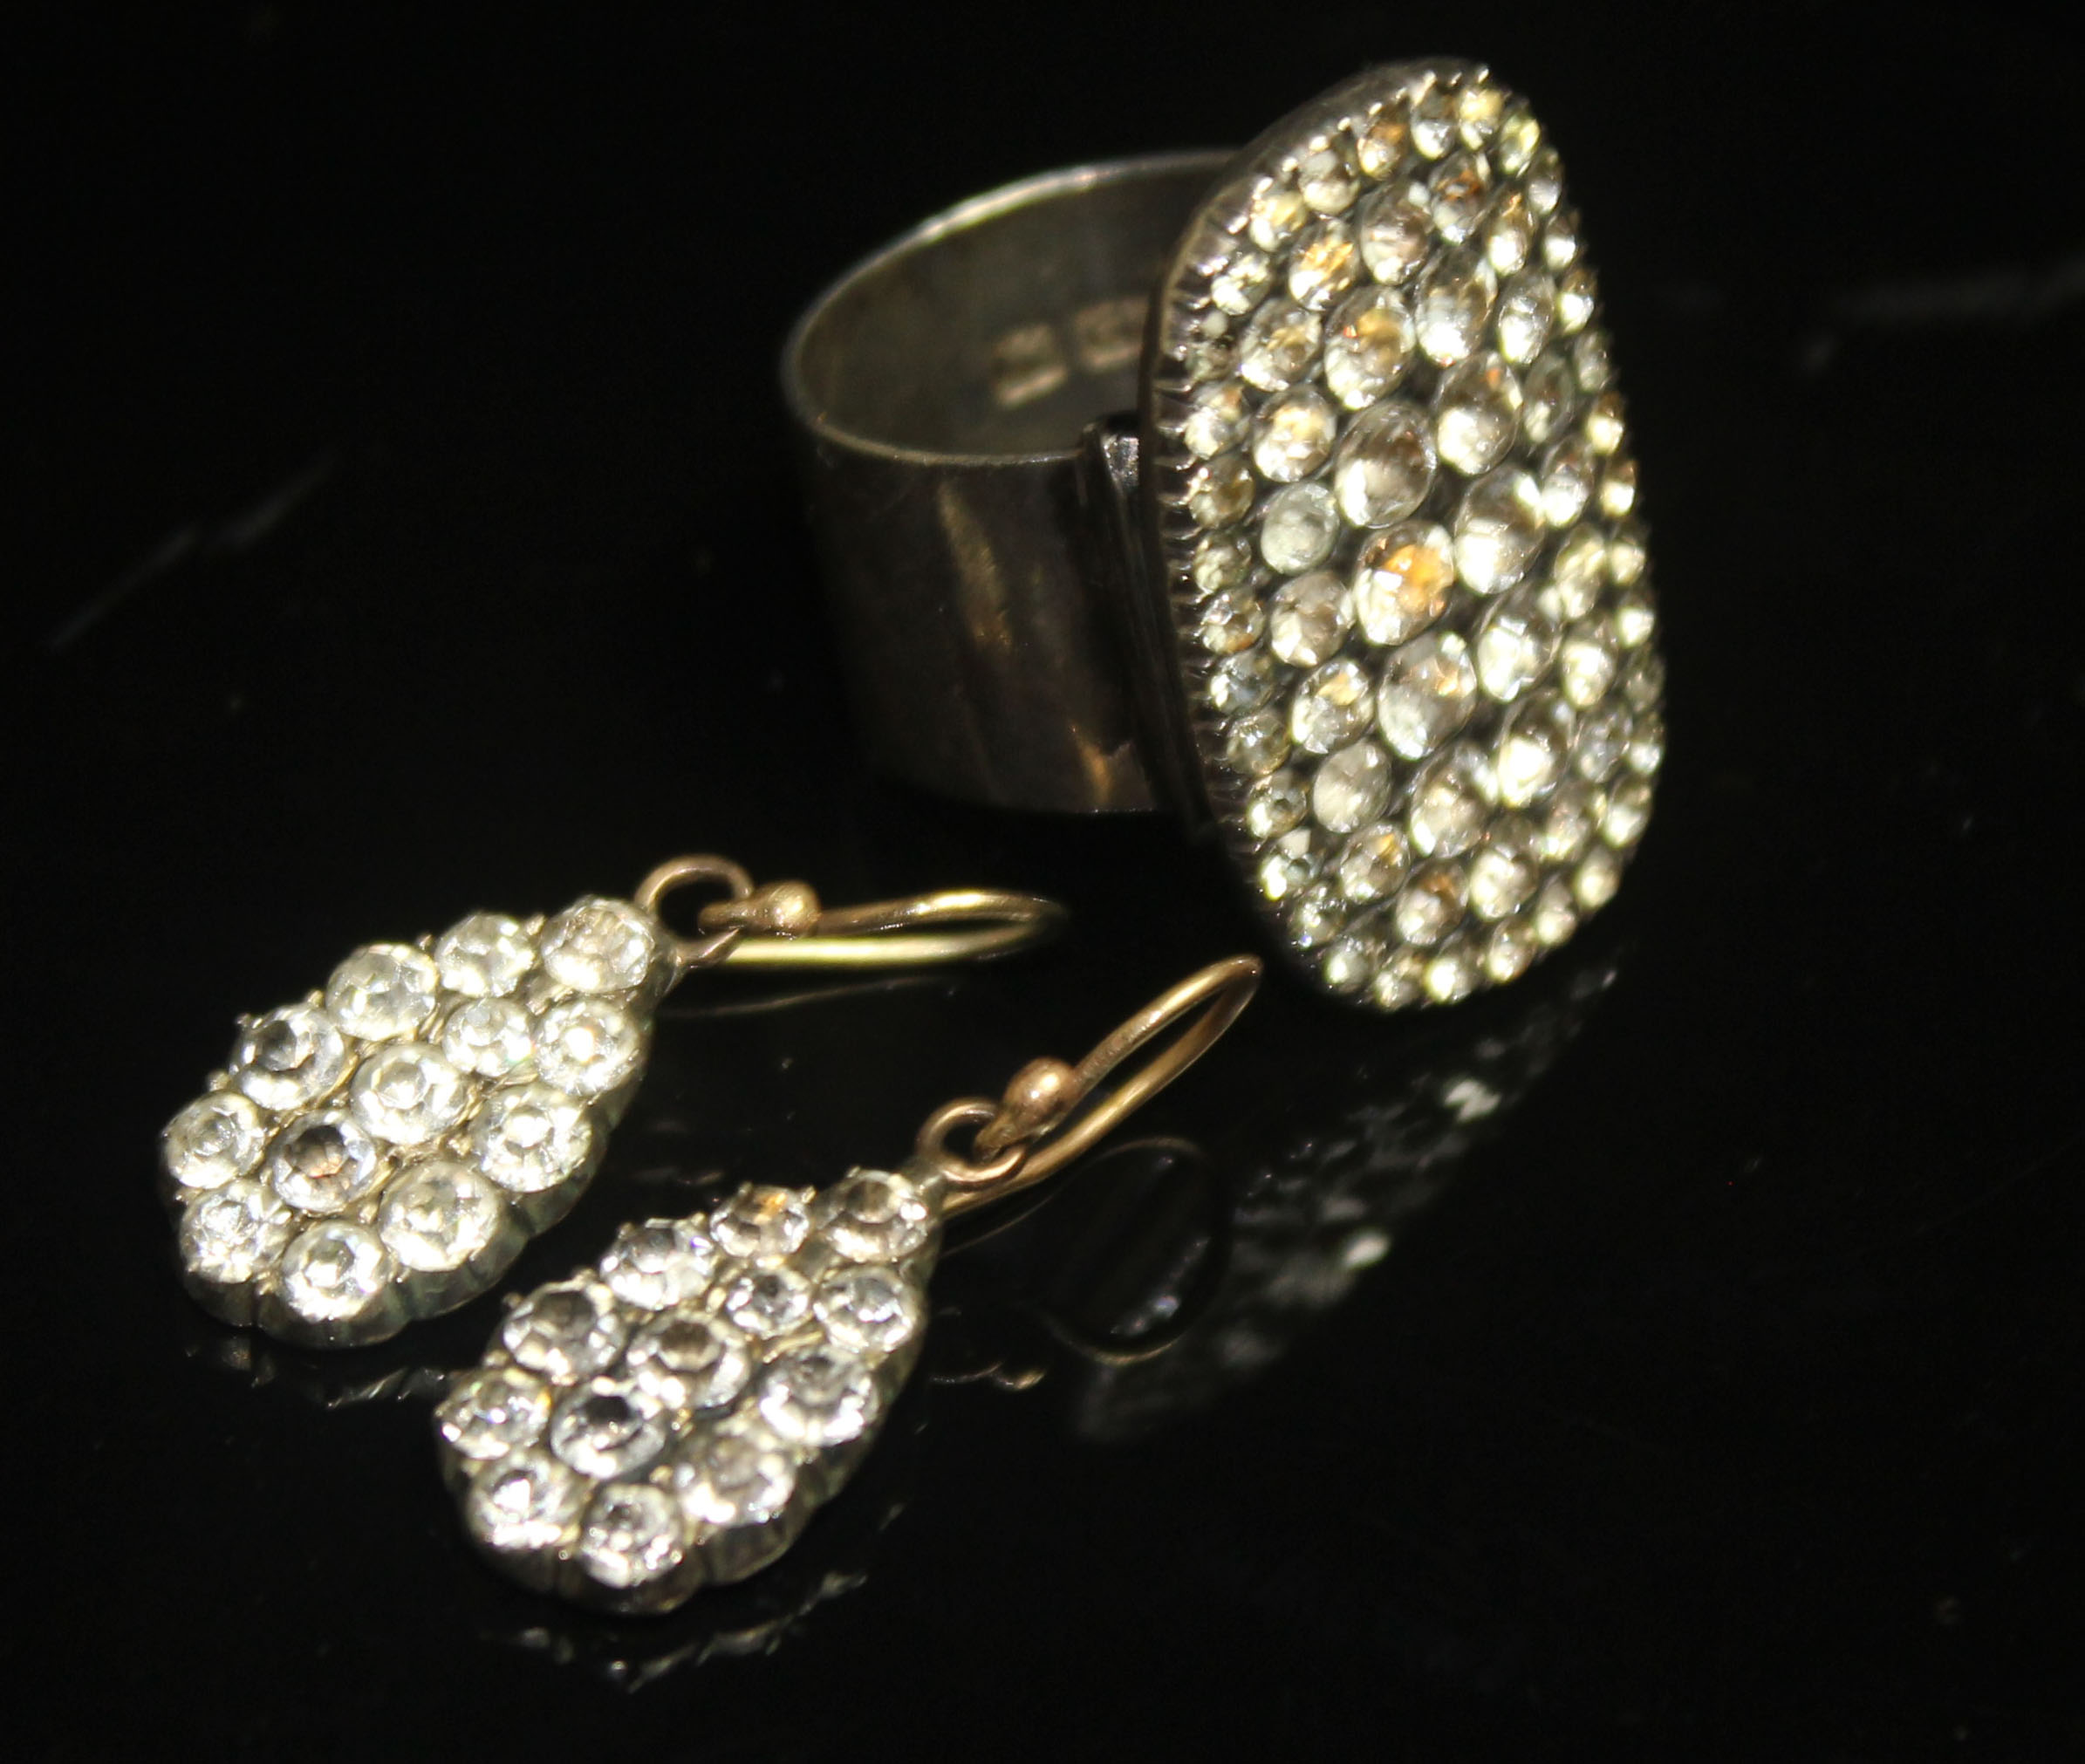 A 19TH CENTURY PASTE DRESS RING AND EARRINGS. The ring having a large rectangular paste-set bezel on